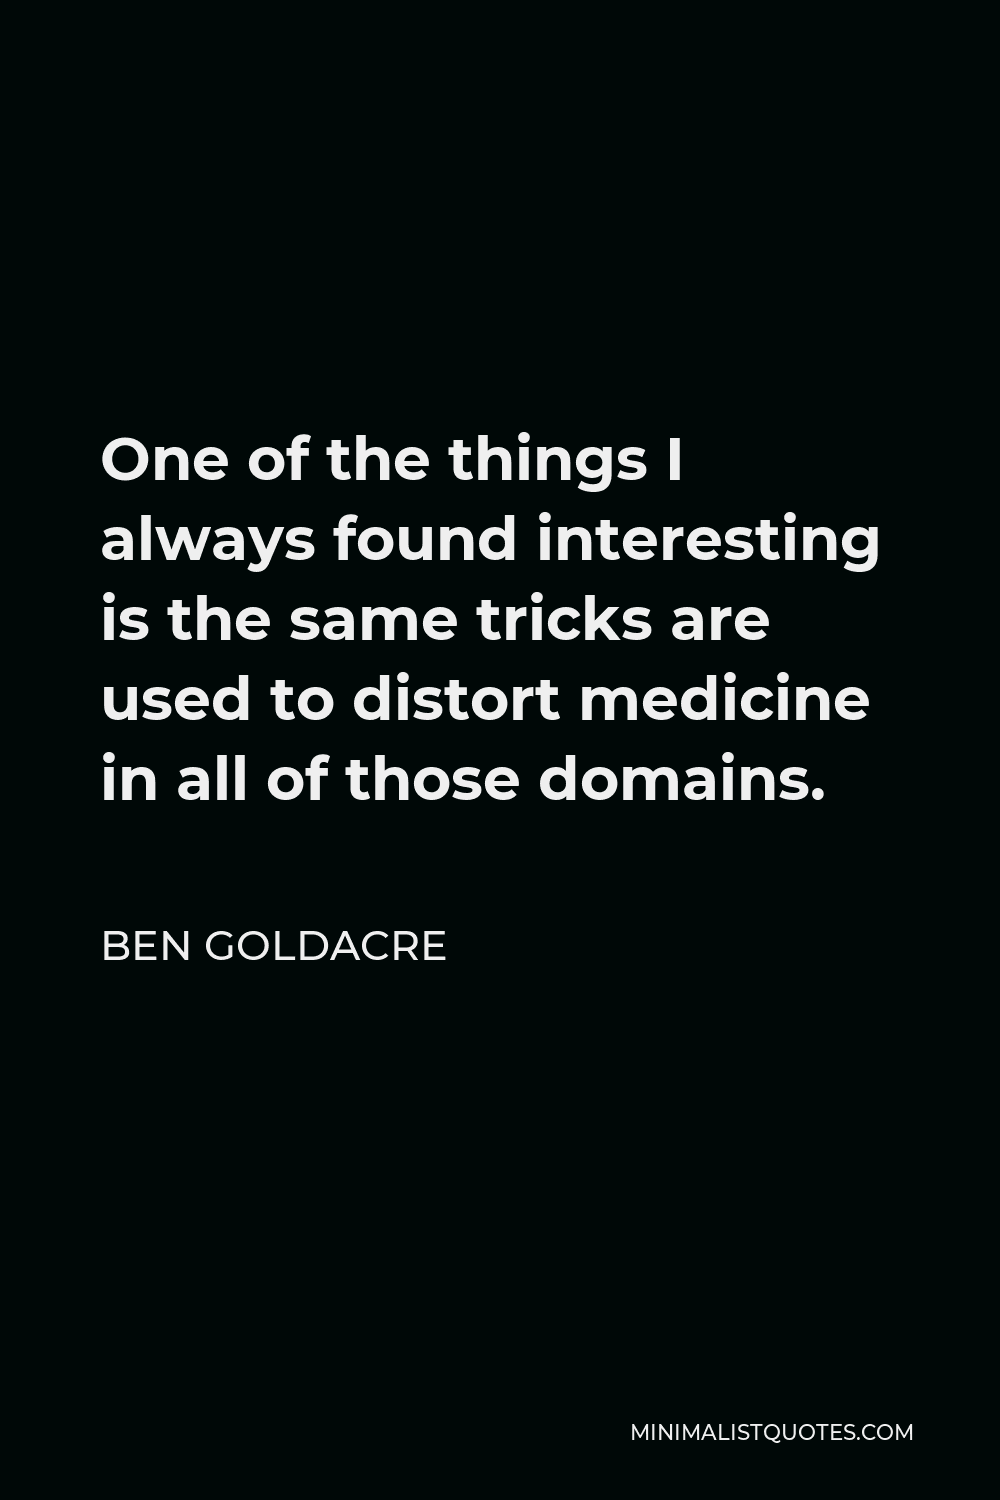 Ben Goldacre Quote - One of the things I always found interesting is the same tricks are used to distort medicine in all of those domains.